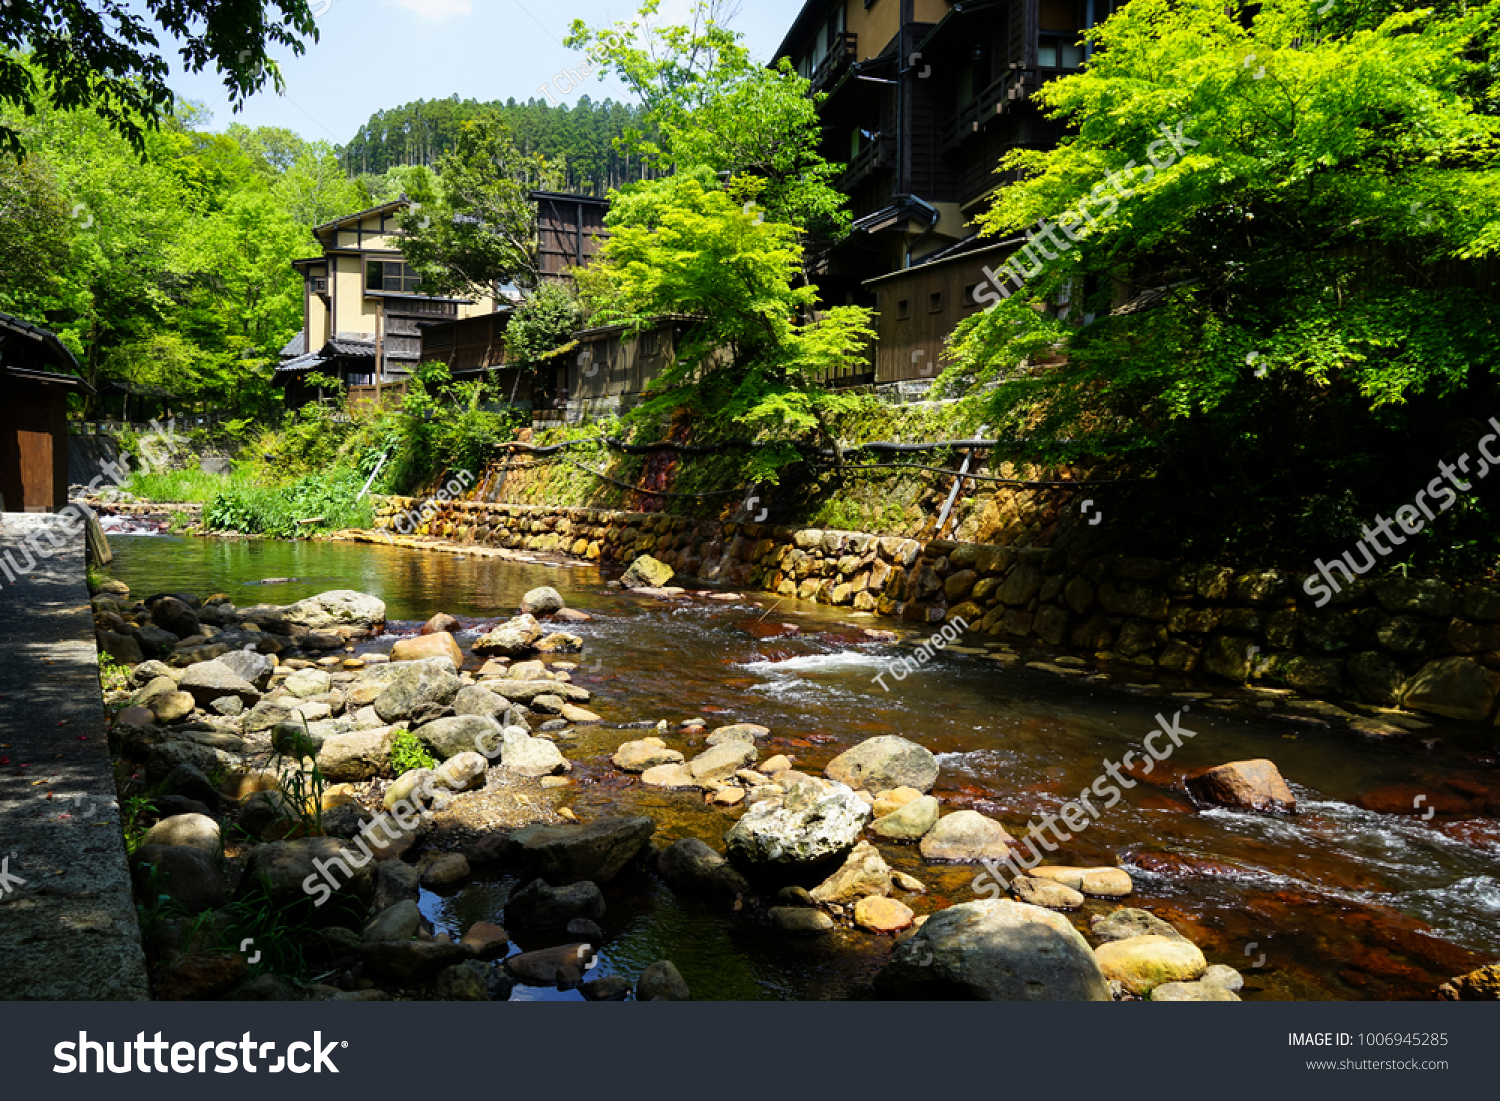 View of fresh river stream, stone bank and natural rock beach with green trees and local buildings in Kurokawa onsen town, Japan #1006945285